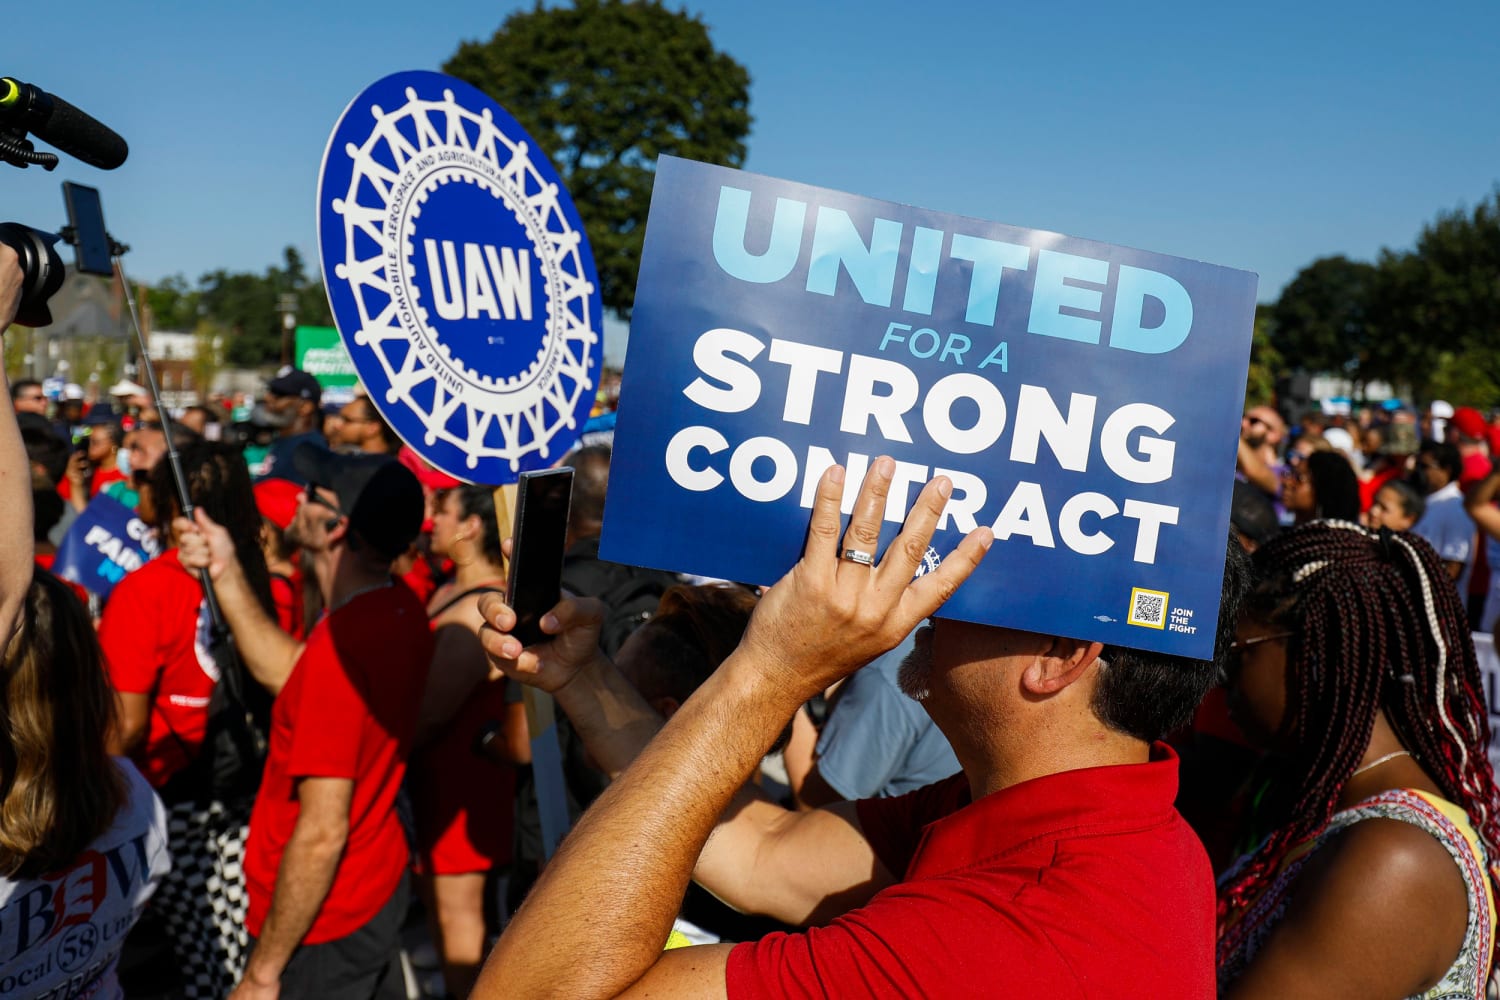 Potential UAW strike: Where labor talks stand and what’s at stake